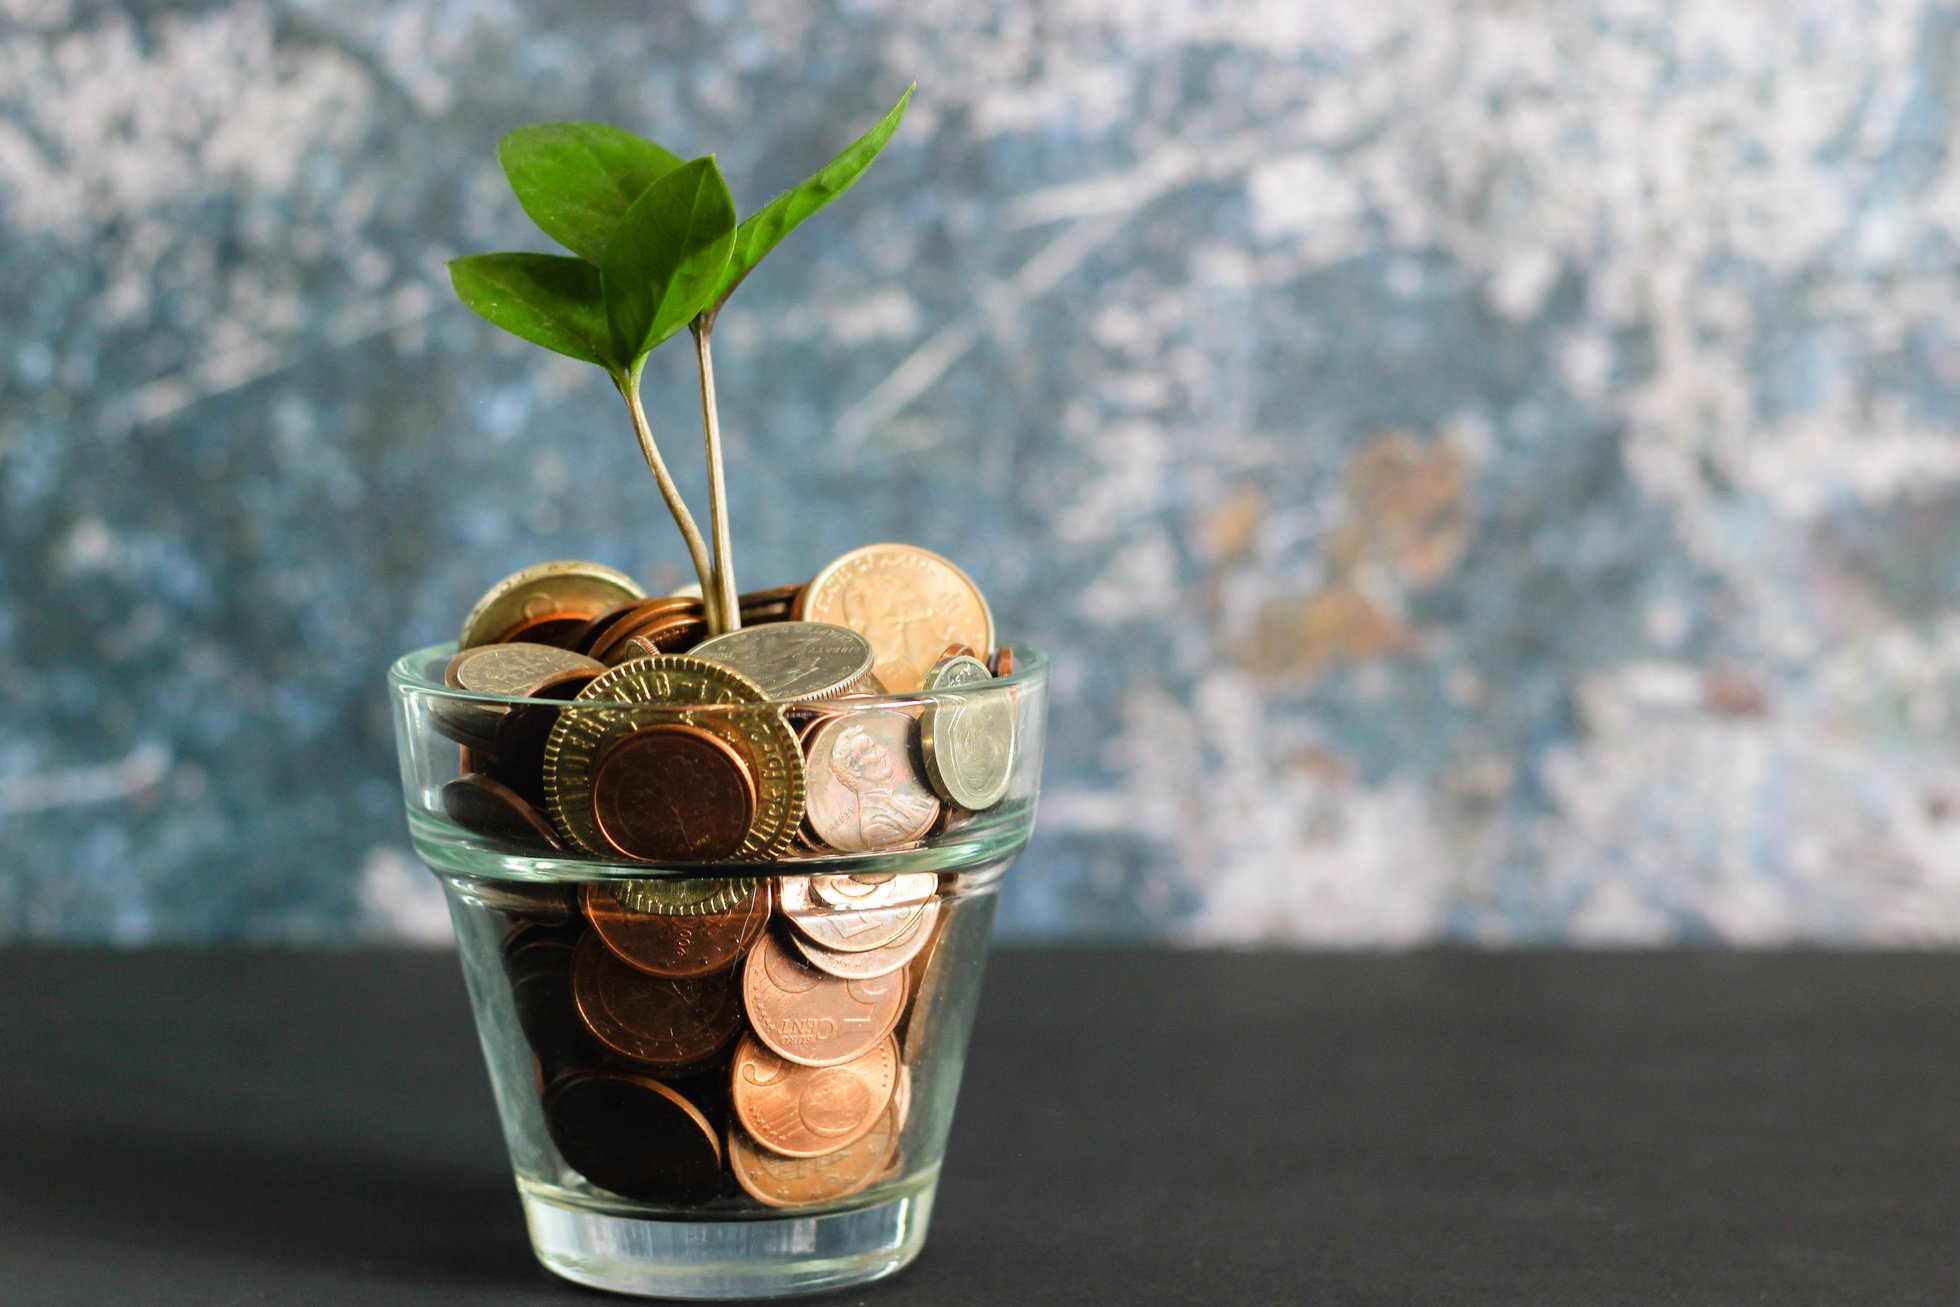 Plant growing from cup of coins